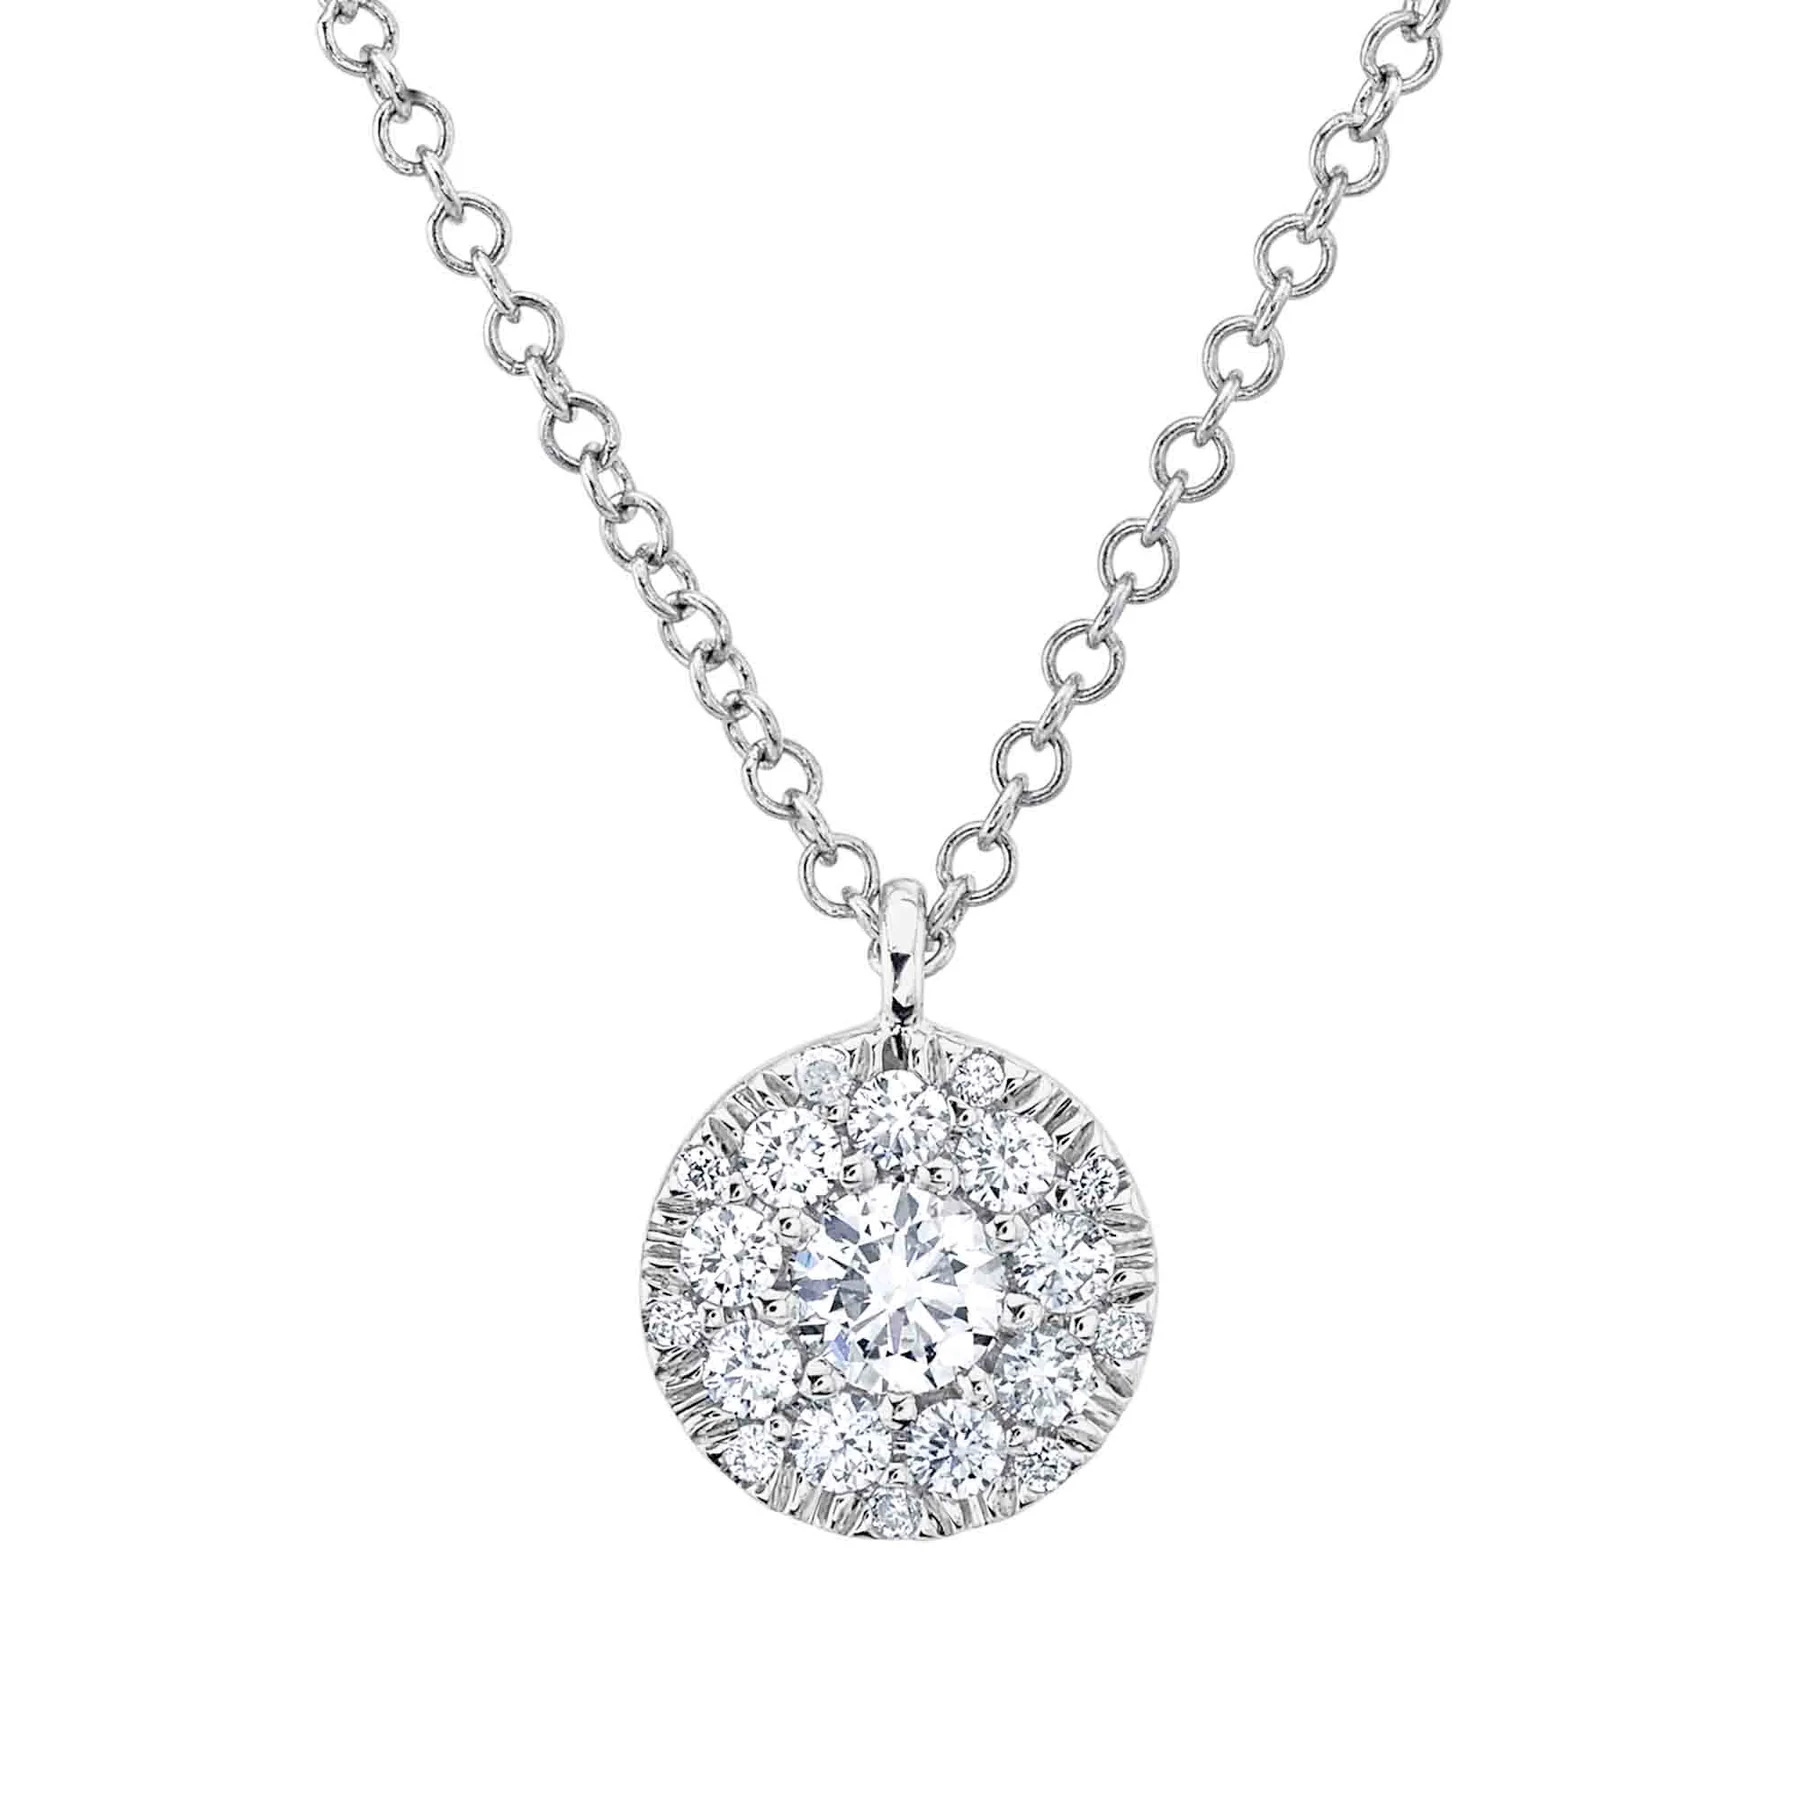 One white gold necklace directly facing the camera. The necklace features a round pendant has center diamond surrounded by smaller side diamonds.